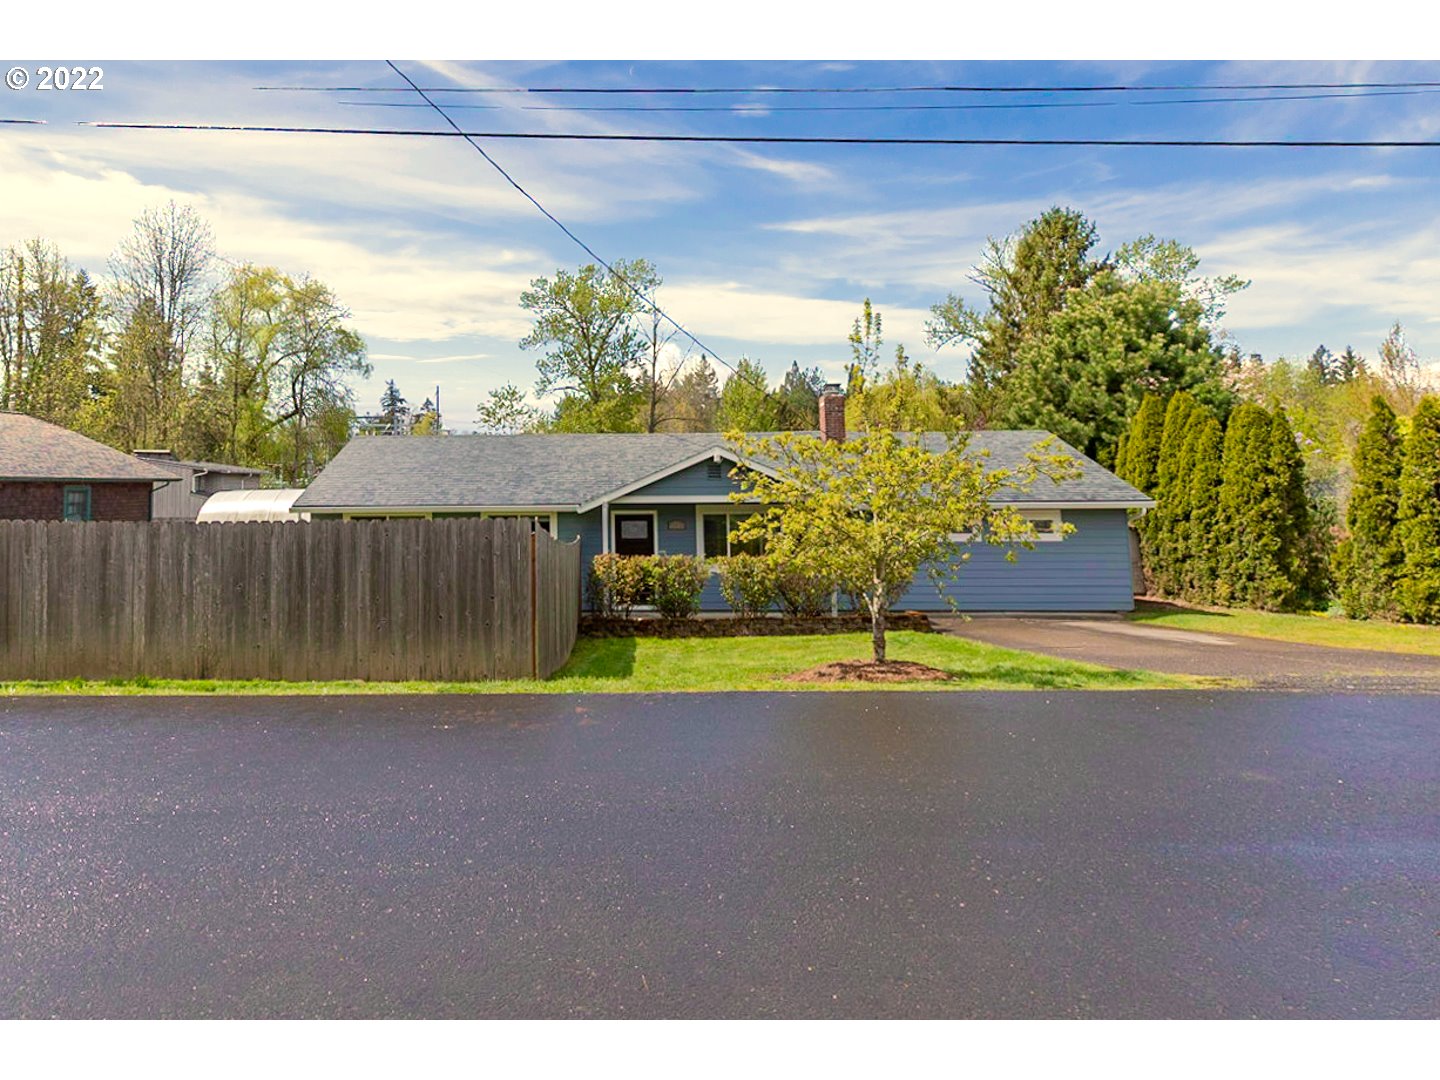 7295 SW 68TH AVE, Portland, OR 97223